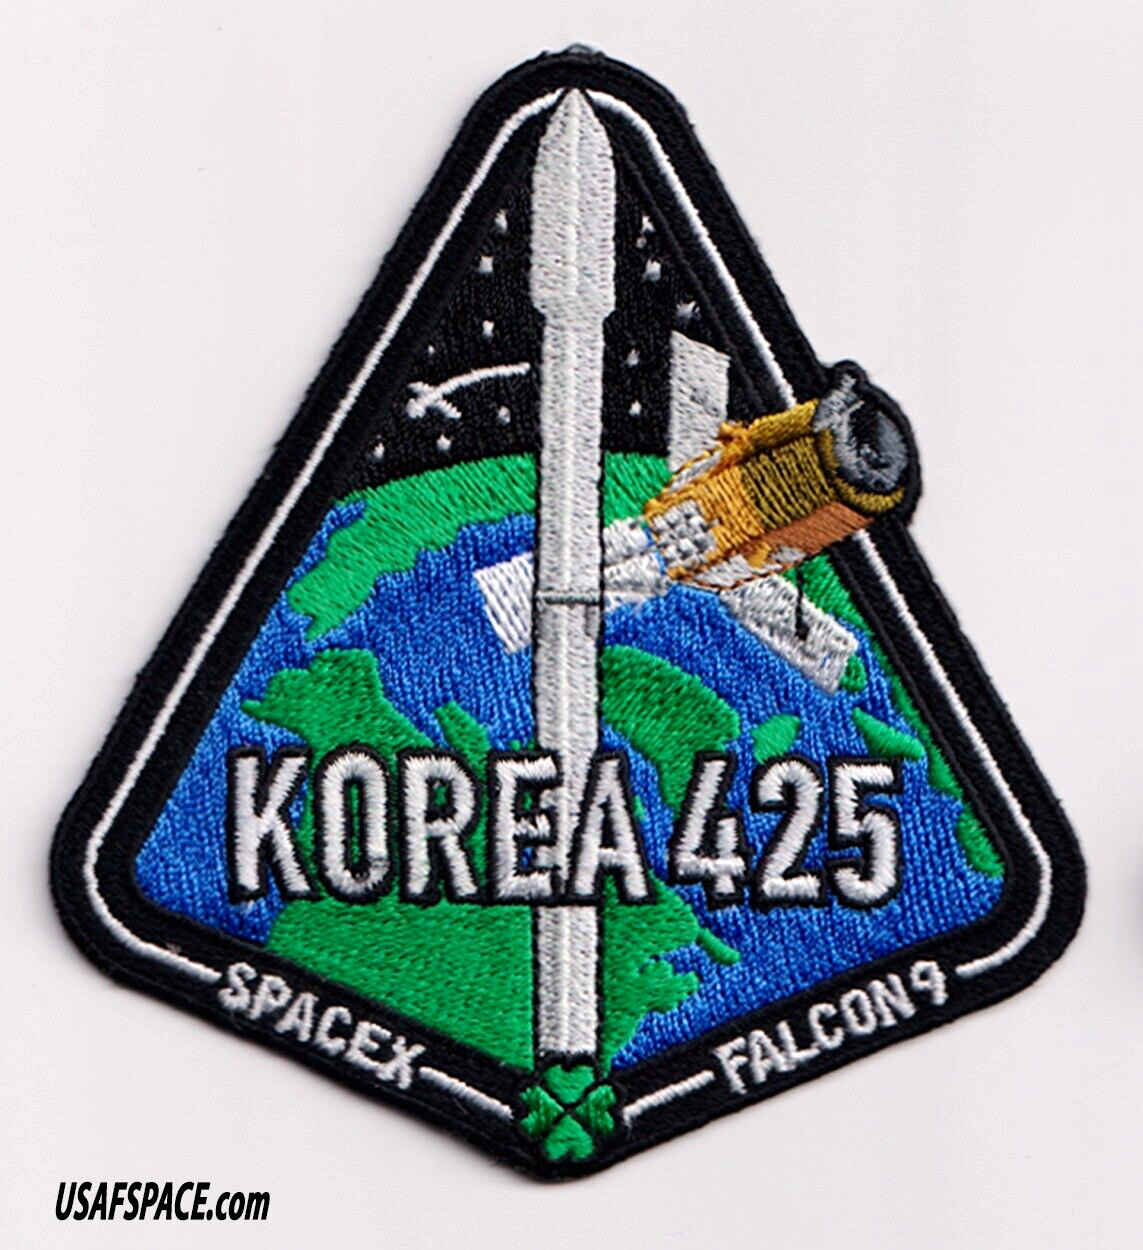 Authentic KOREA 425 SPACEX FALCON-9 VSFB SPY SATELLITE Mission Employee PATCH